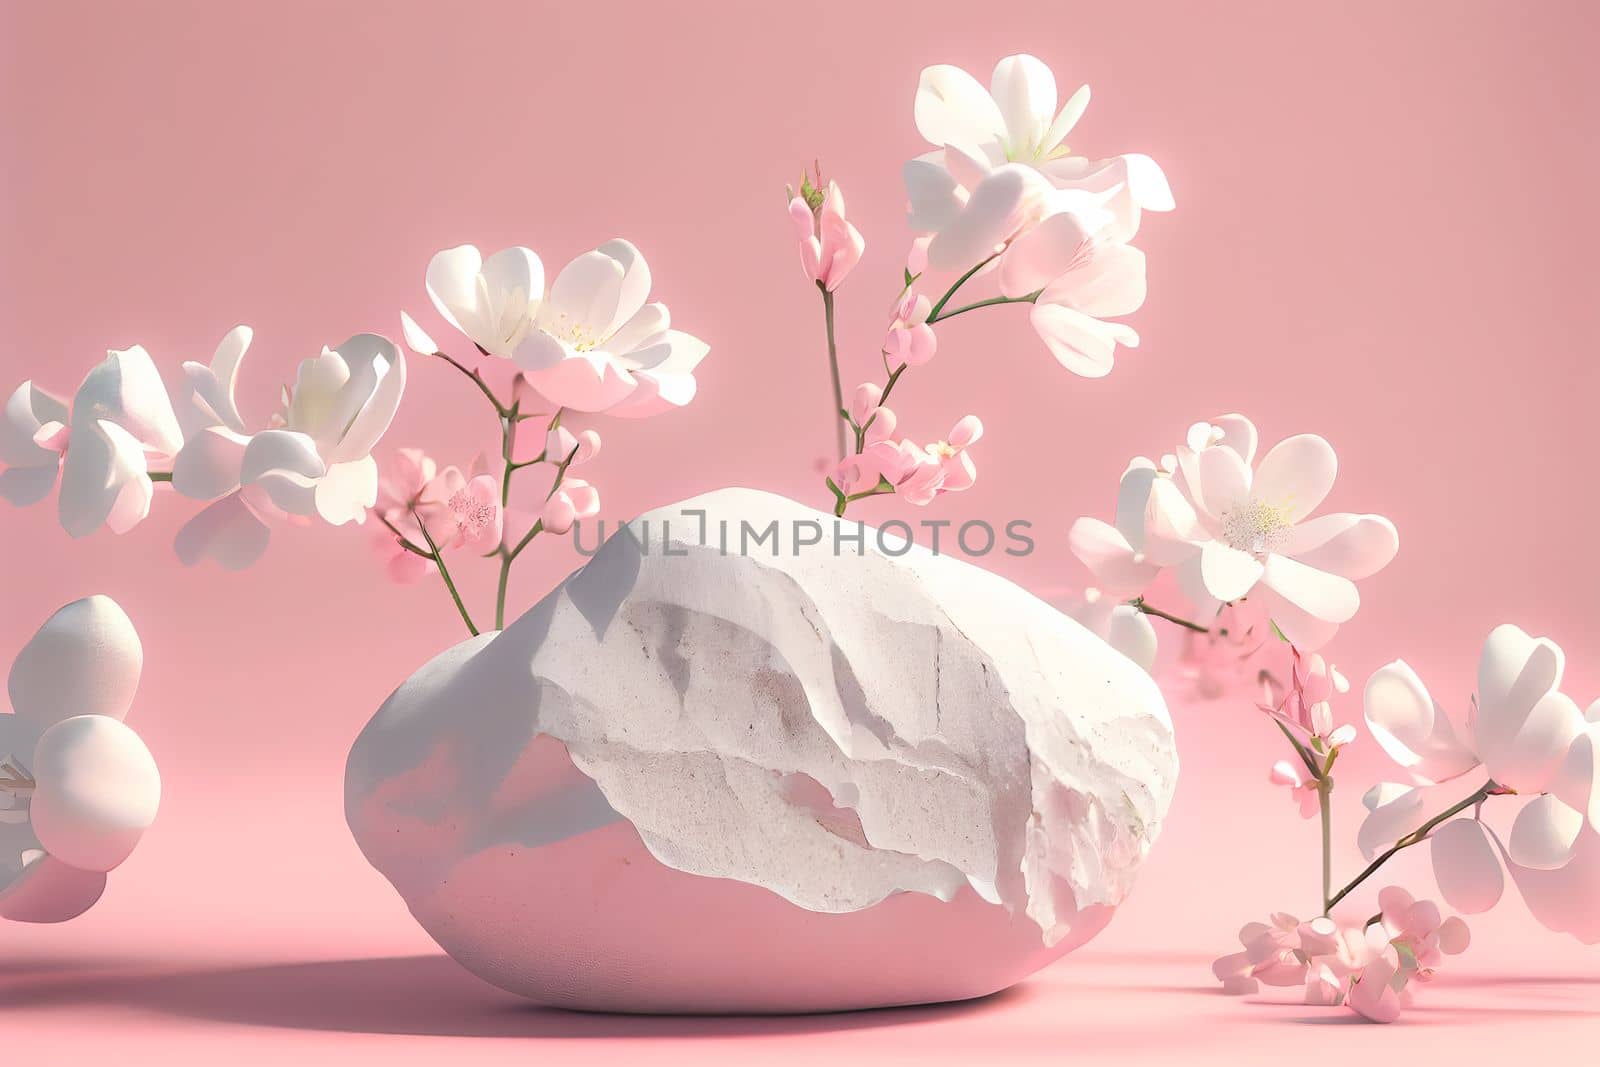 3D render of white stones with blossom flowers on pink background. Panoramic banner background with copy space.